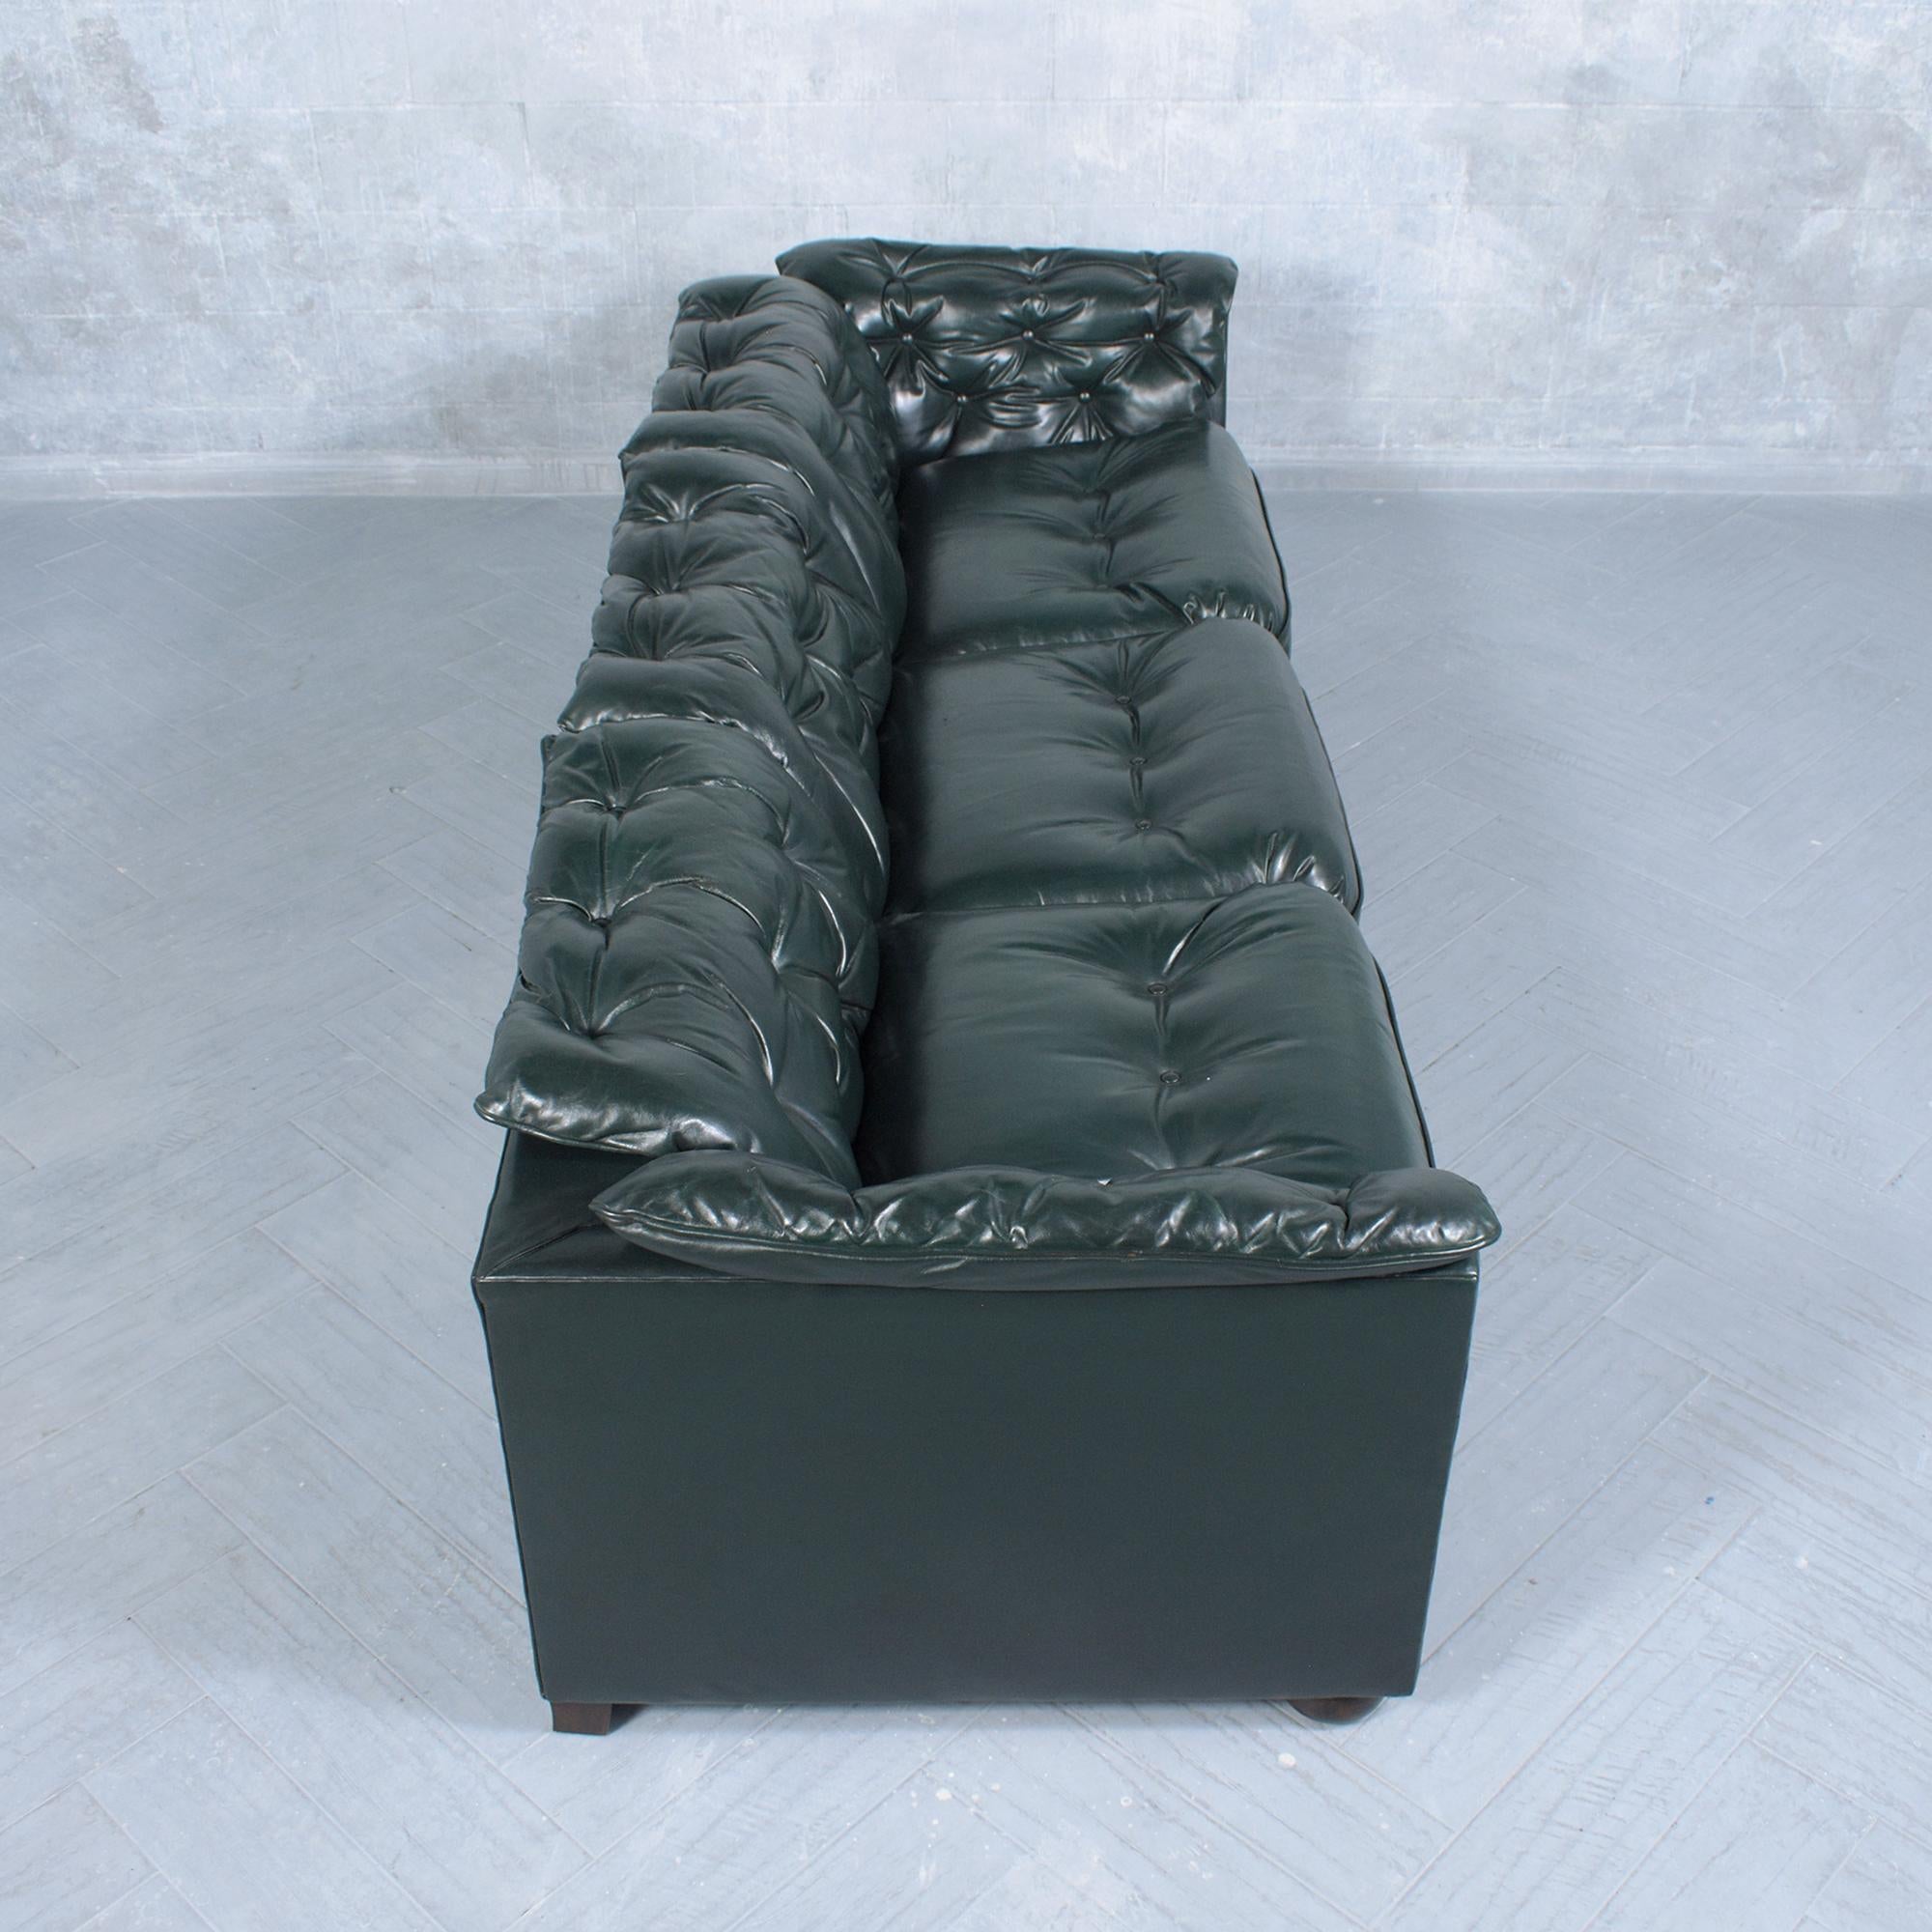 Carved 1960s Vintage Emerald Green Tufted Chesterfield Leather Sofa